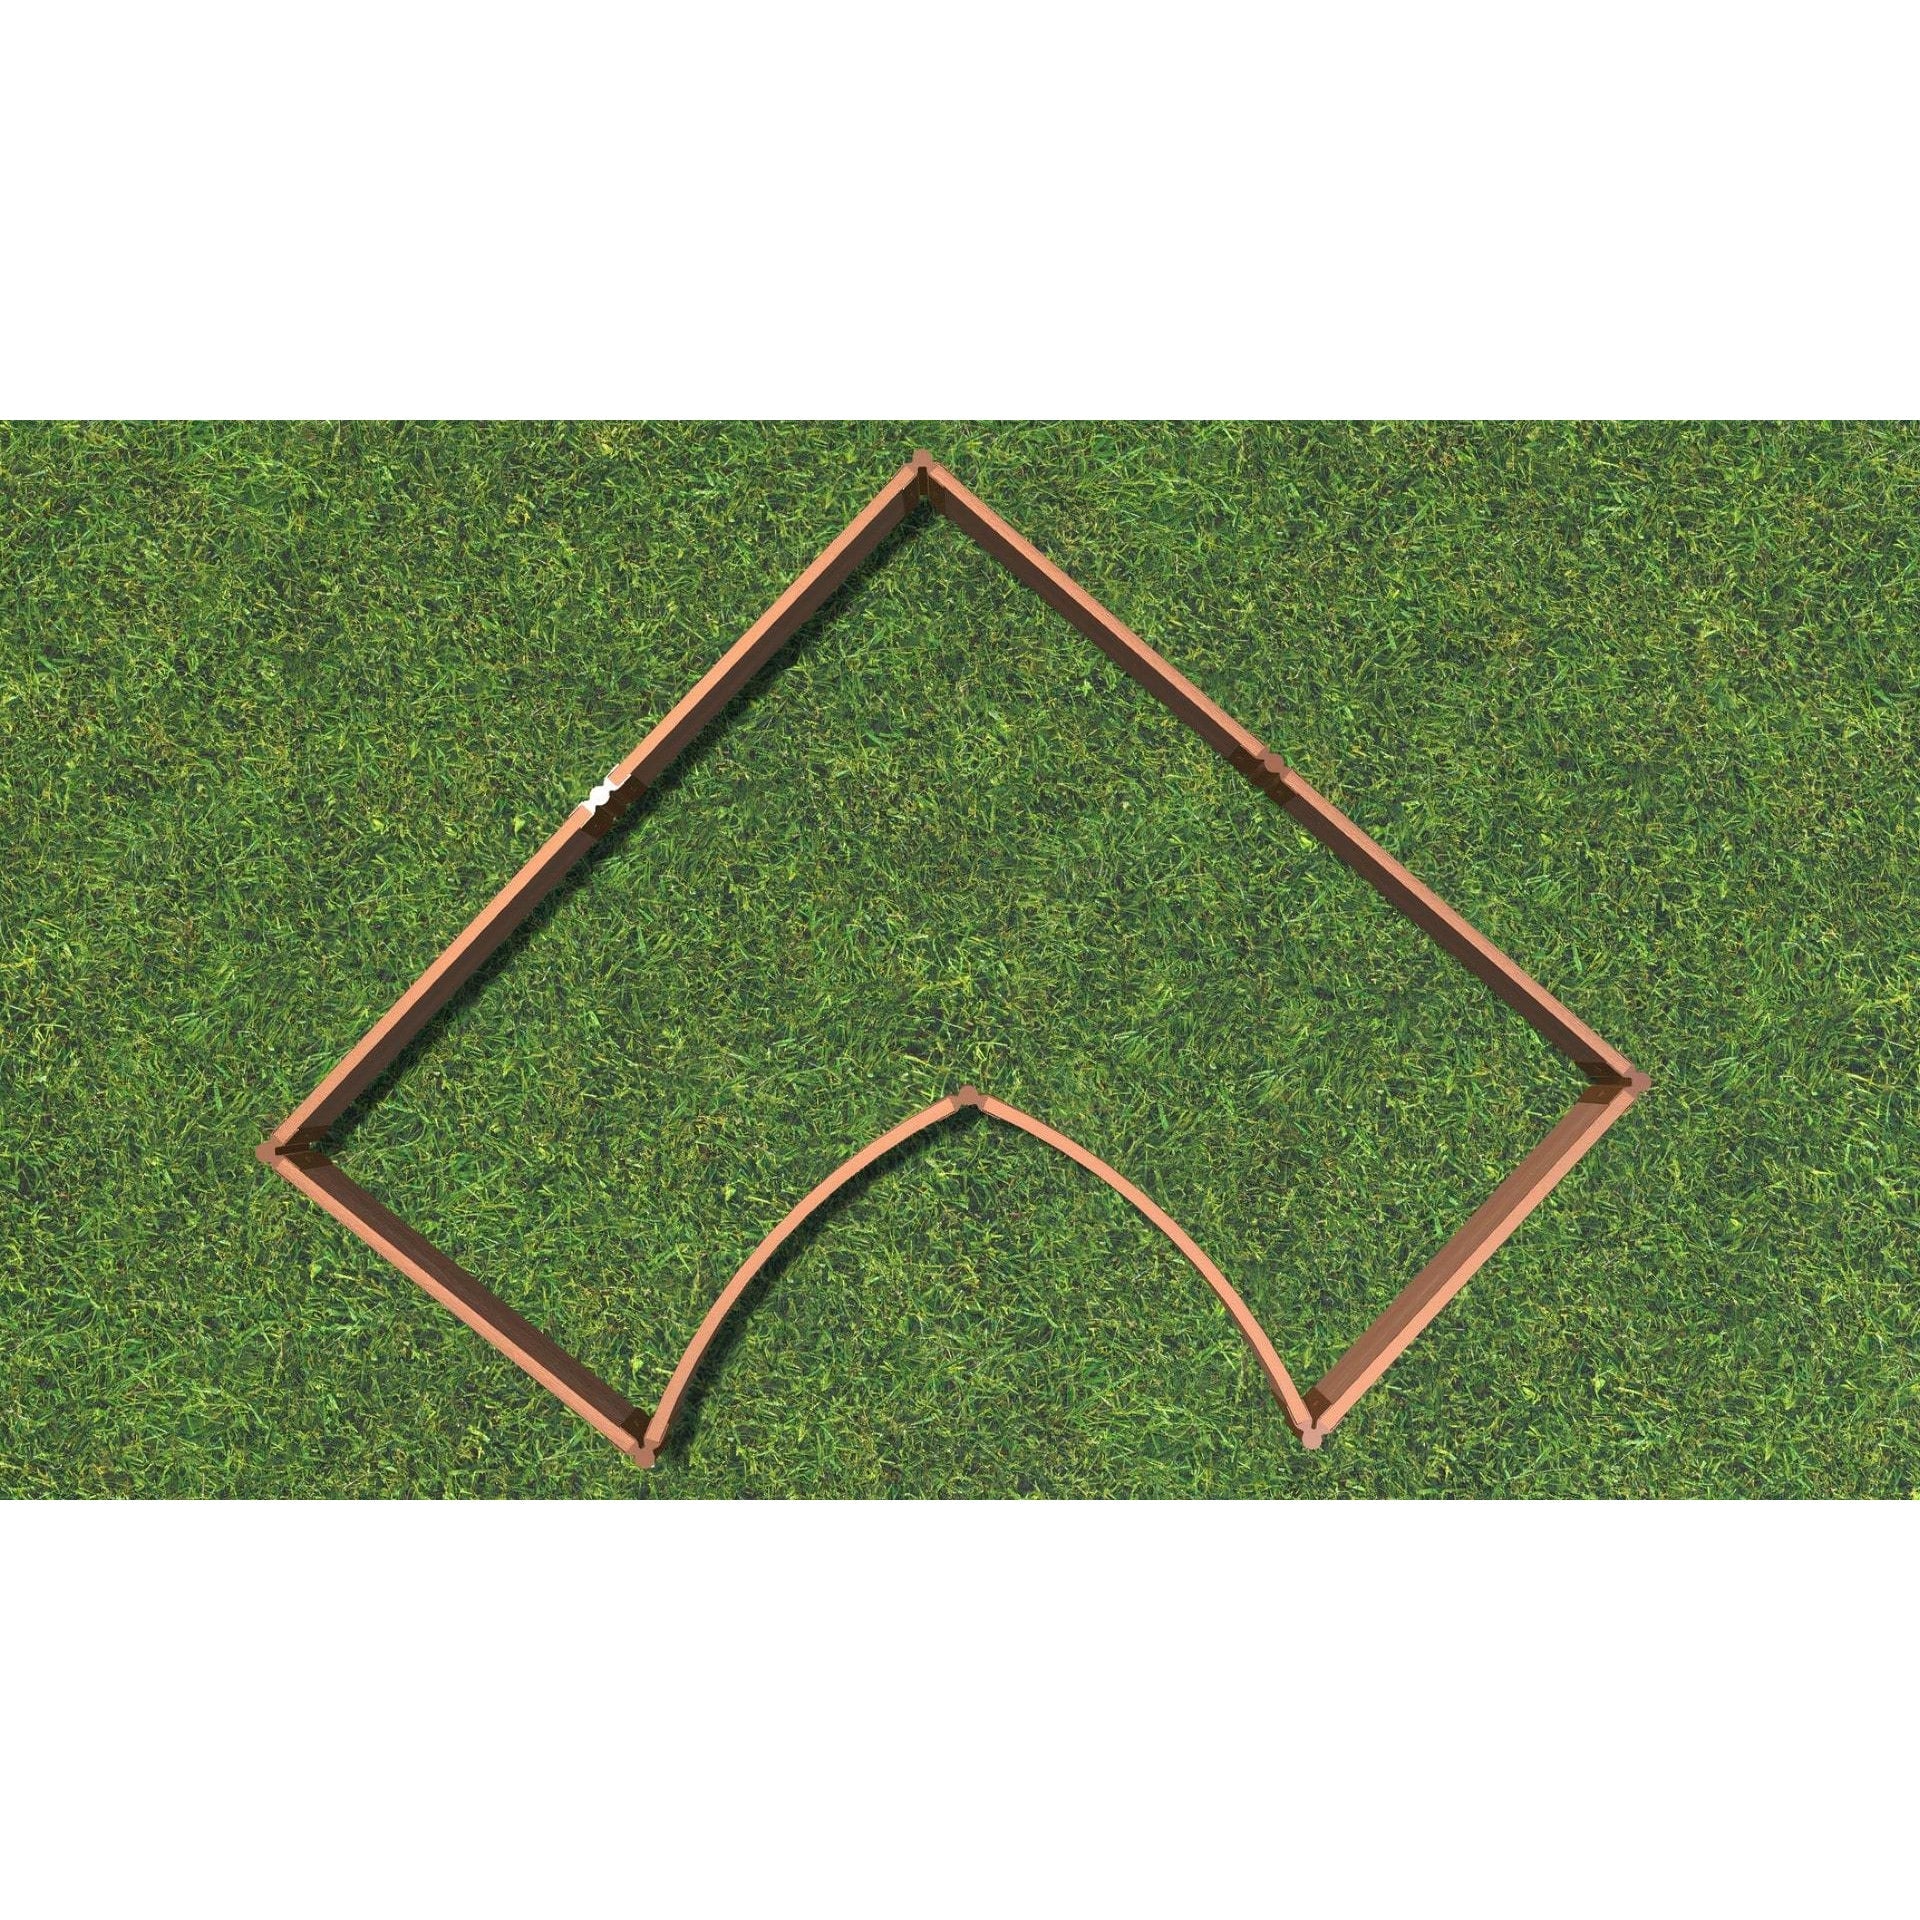 Frame It All Gardening Accessories 1" Frame It All | Tool-Free Grand Concourse Interior Curved Corner Raised Garden Bed 8' X 8' X 5.5" - Classic Sienna 800001026